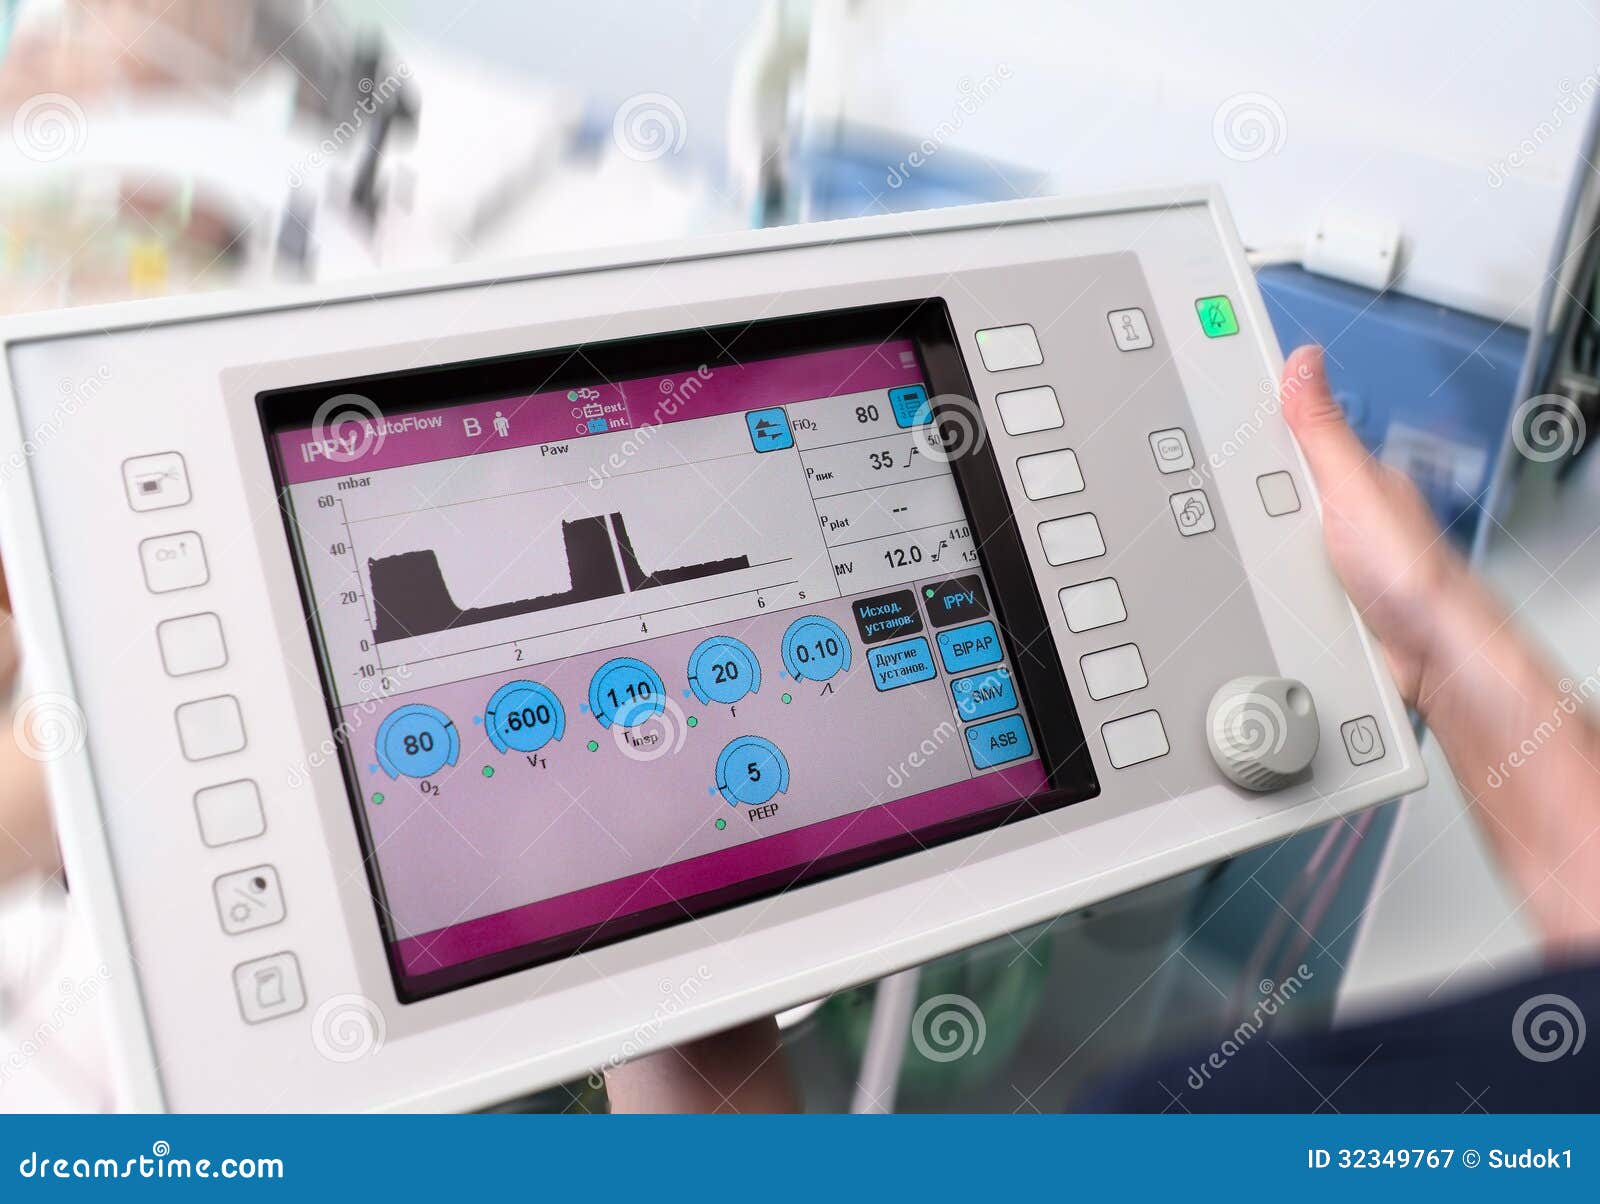 doctor keeps touchscreen of the medical device